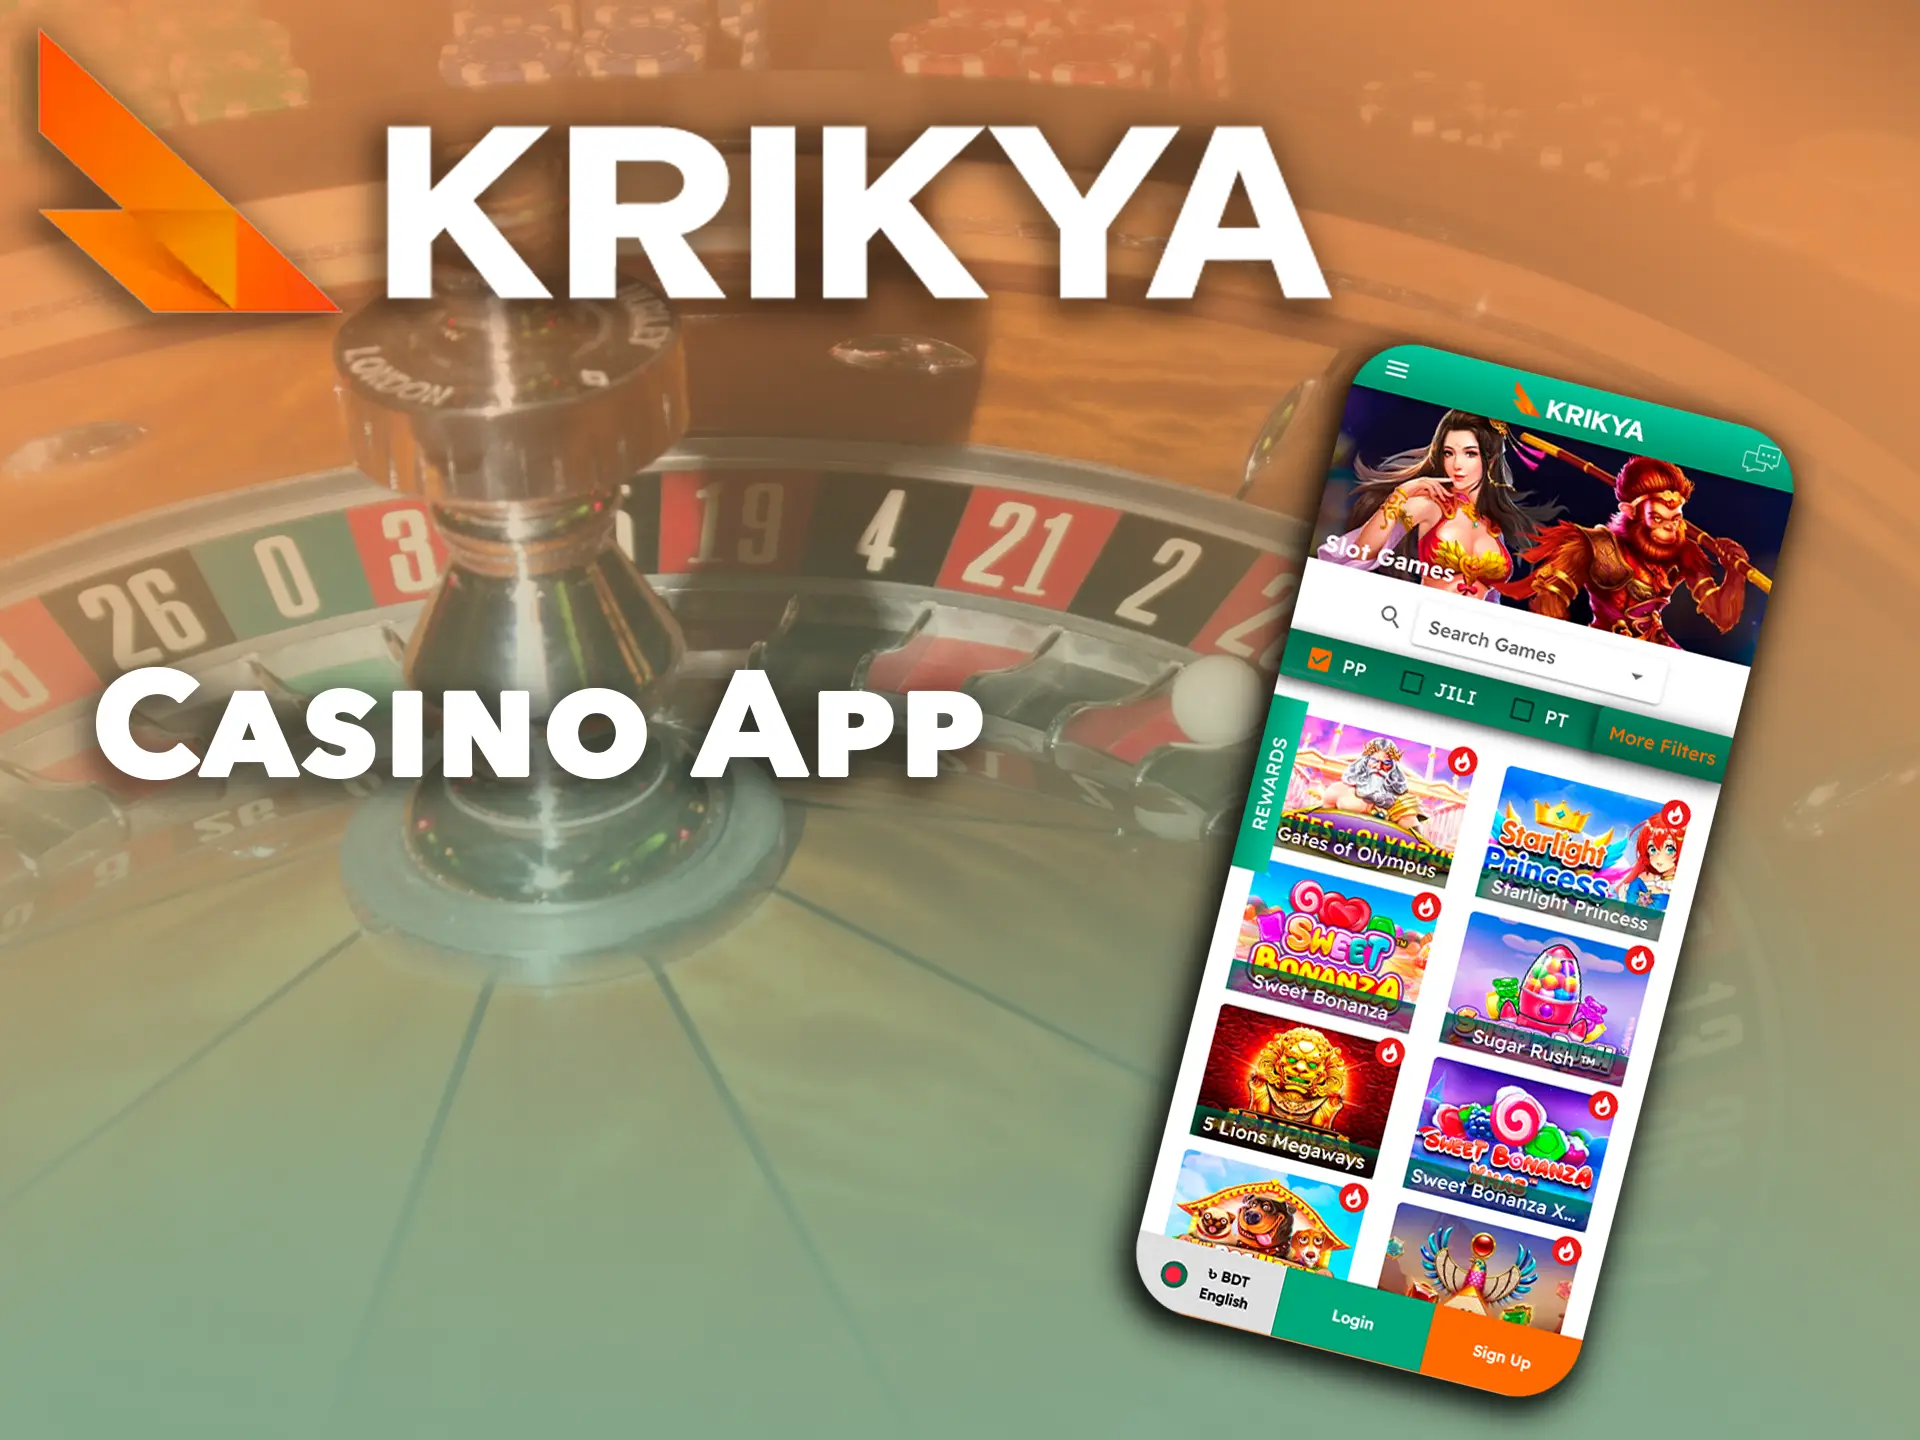 You can enjoy the game away from home, because you can now access the full Krikya Casino interface anywhere.